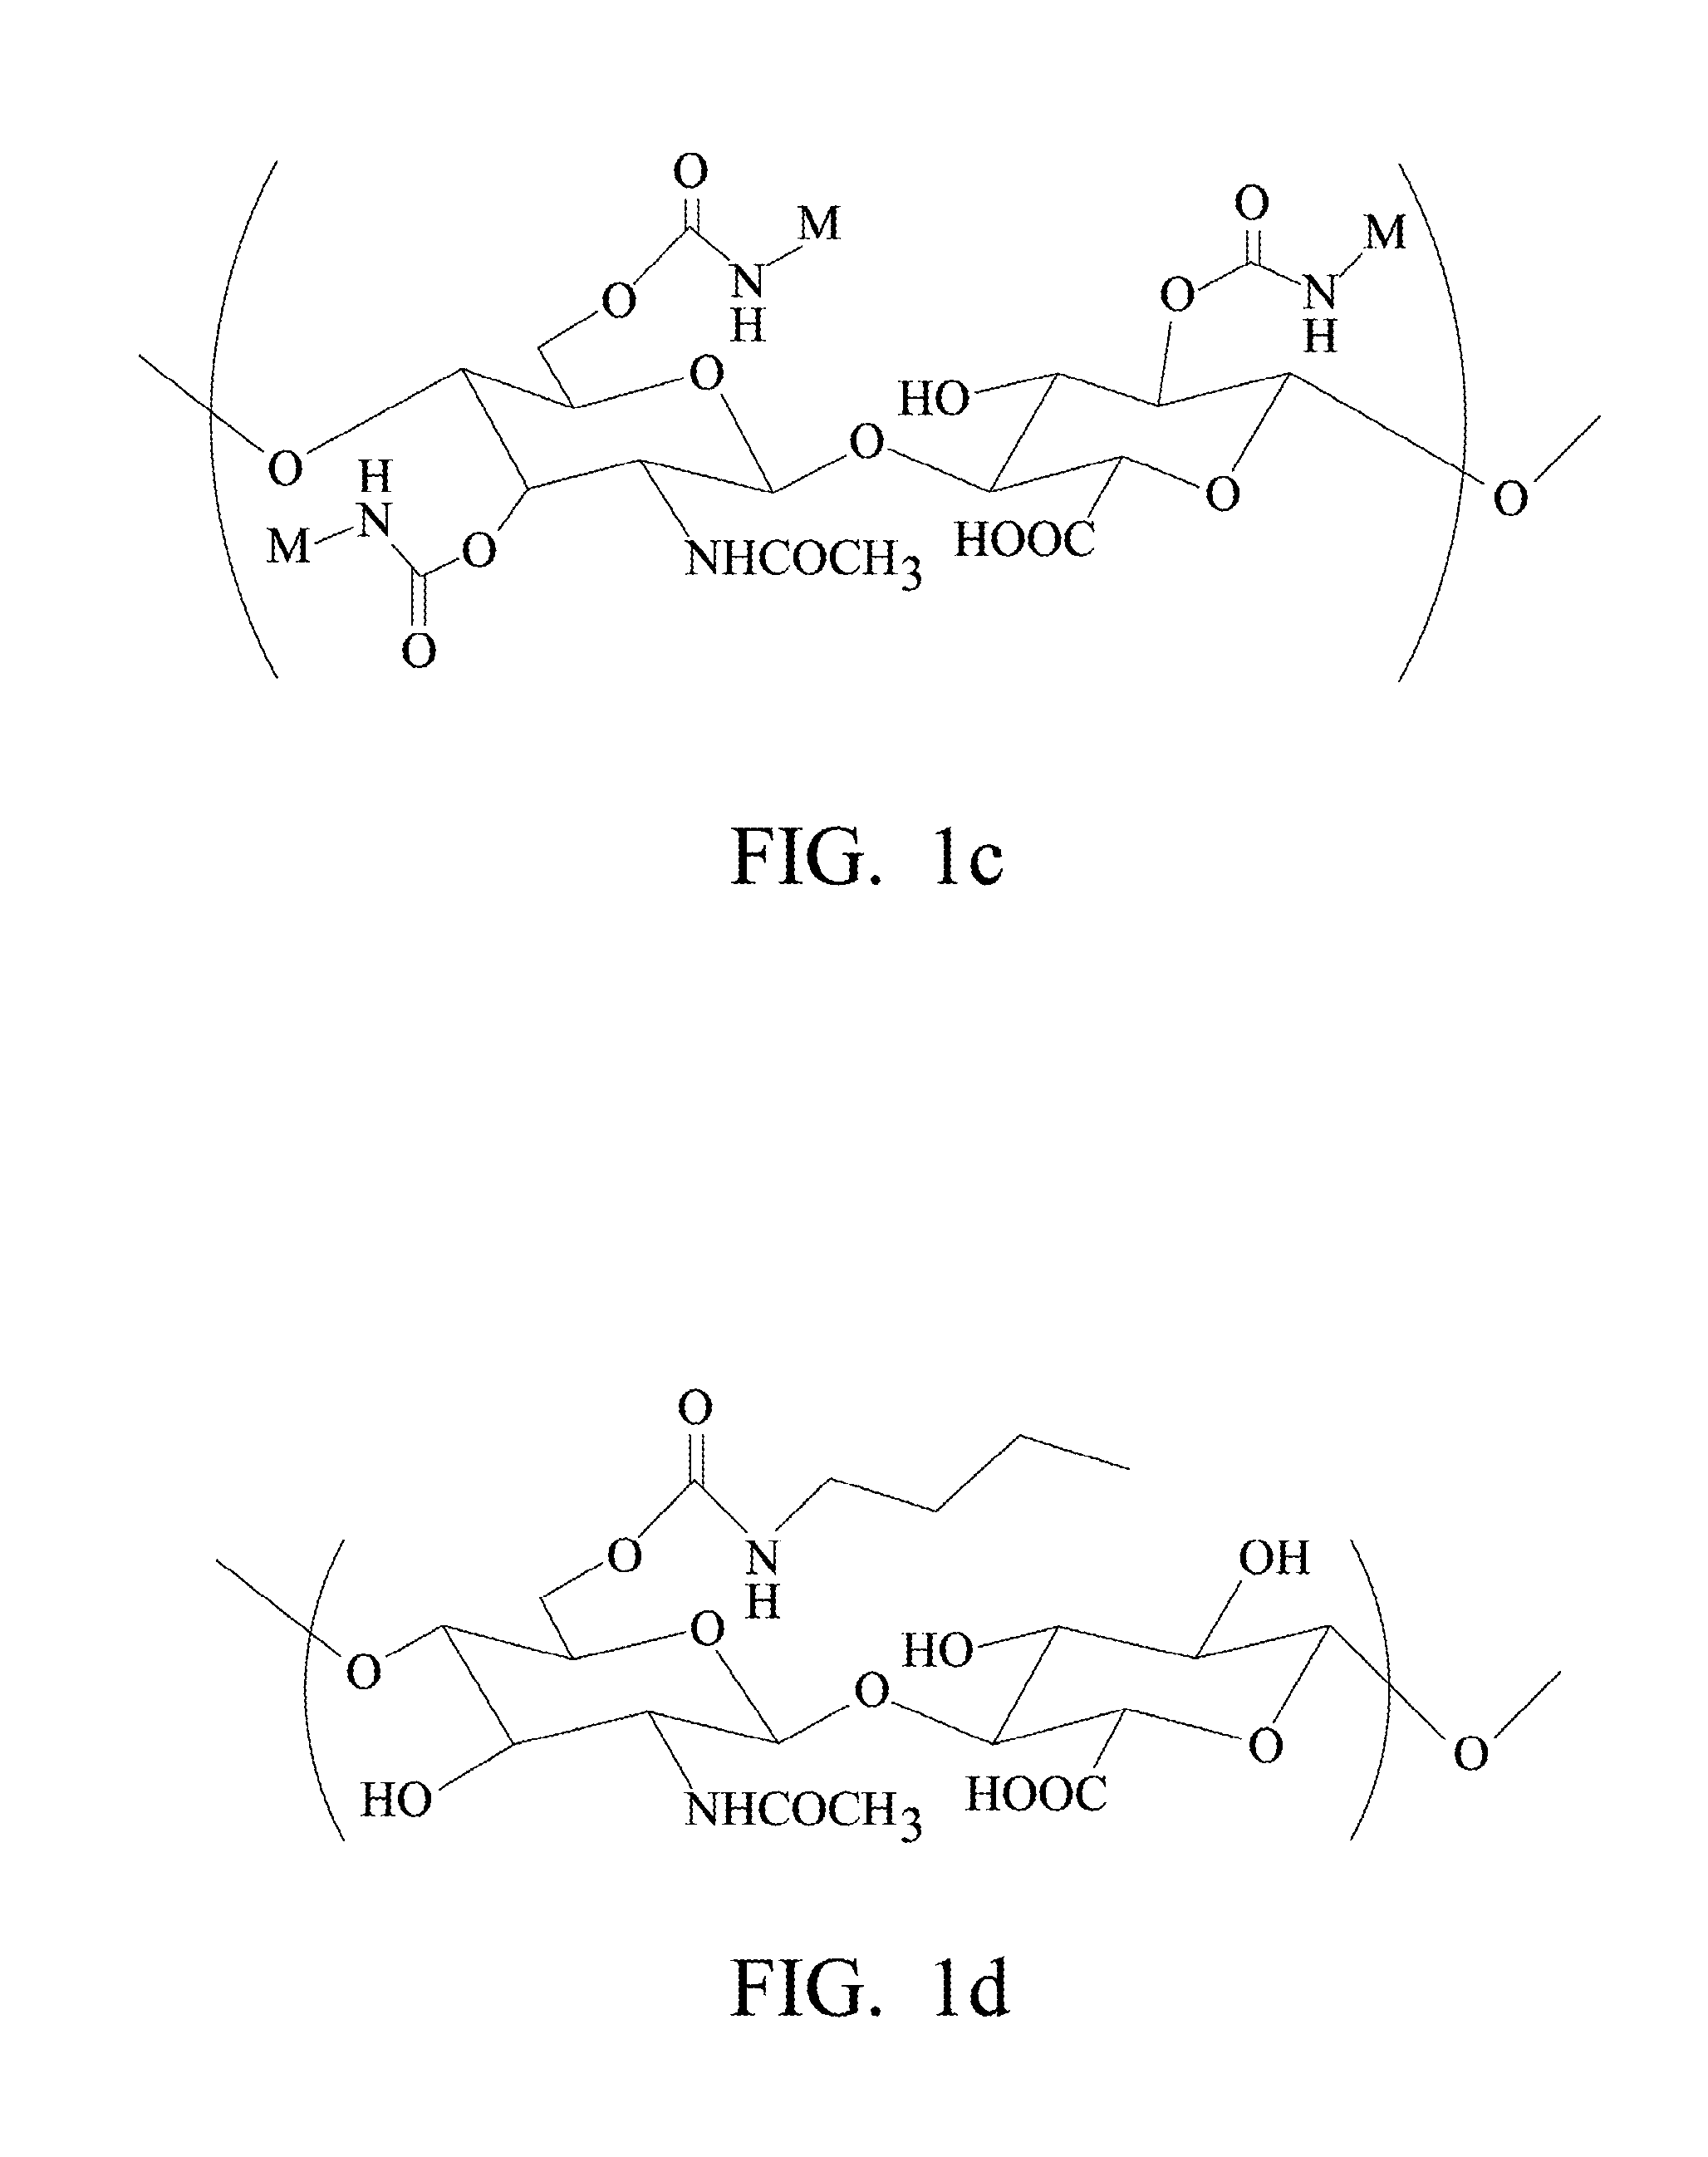 Biodegradable Hyaluronic Acid Derivative, Biodegradable Polymeric Micelle Composition and Pharmaceutical or Bioactive Composition